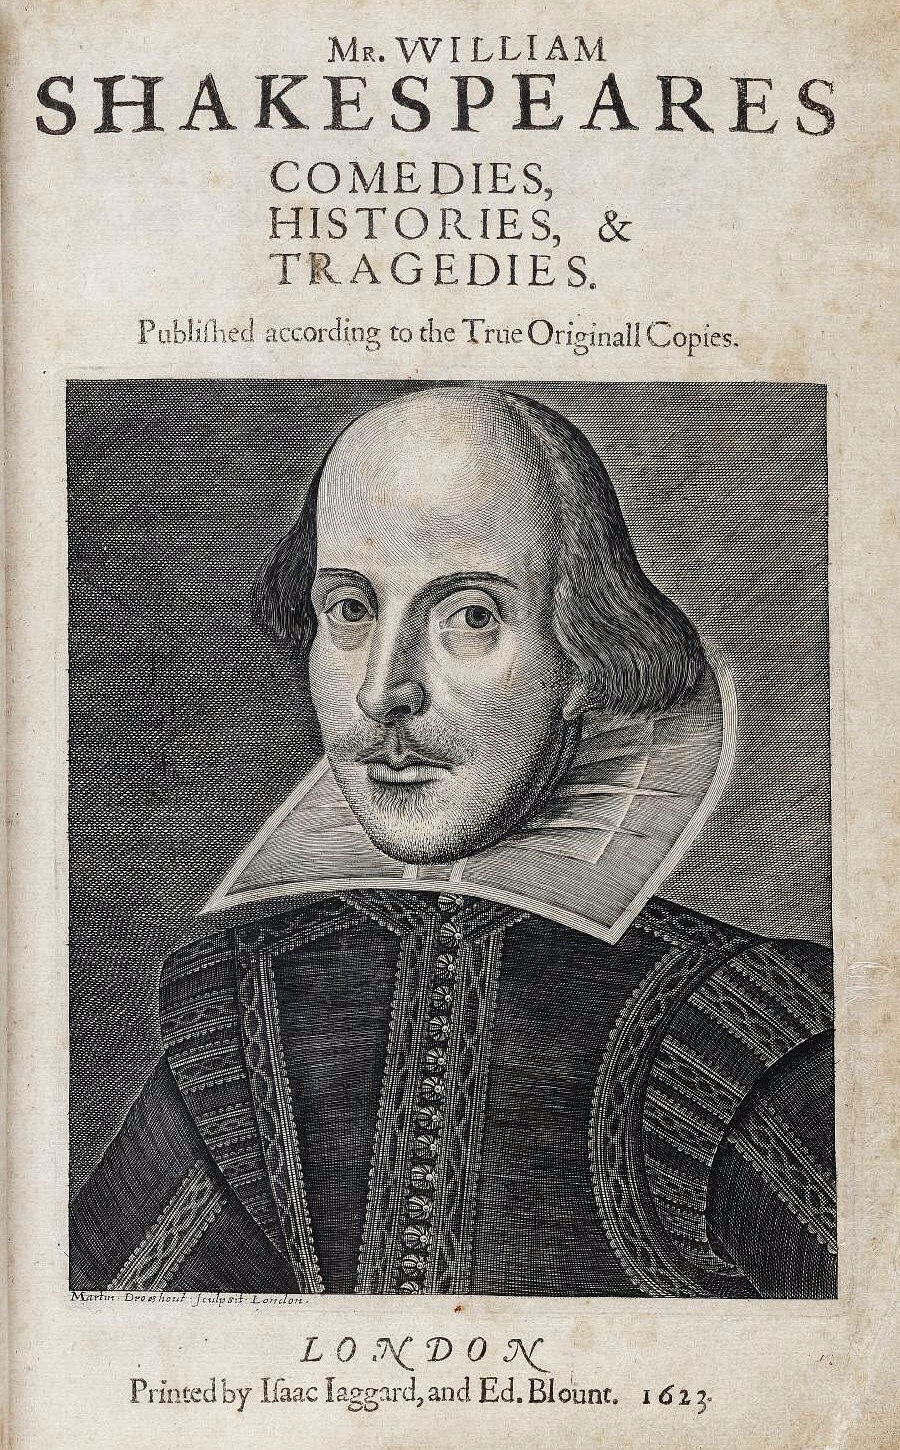 The title page of the First Folio of Shakespeare’s plays. Image: Wikimedia Commons